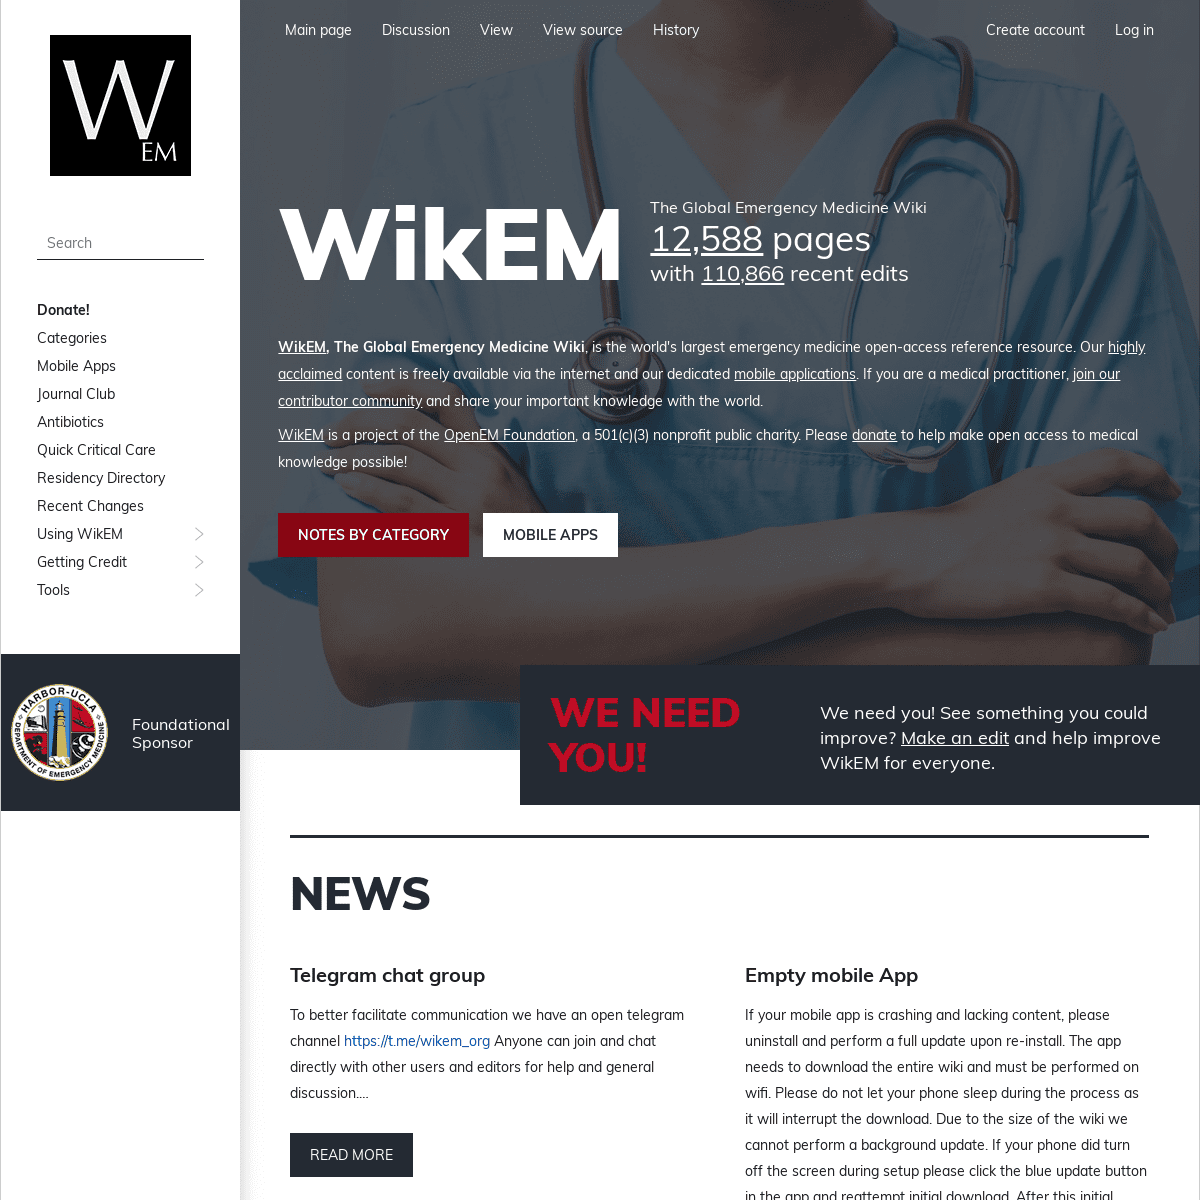 A complete backup of wikem.org